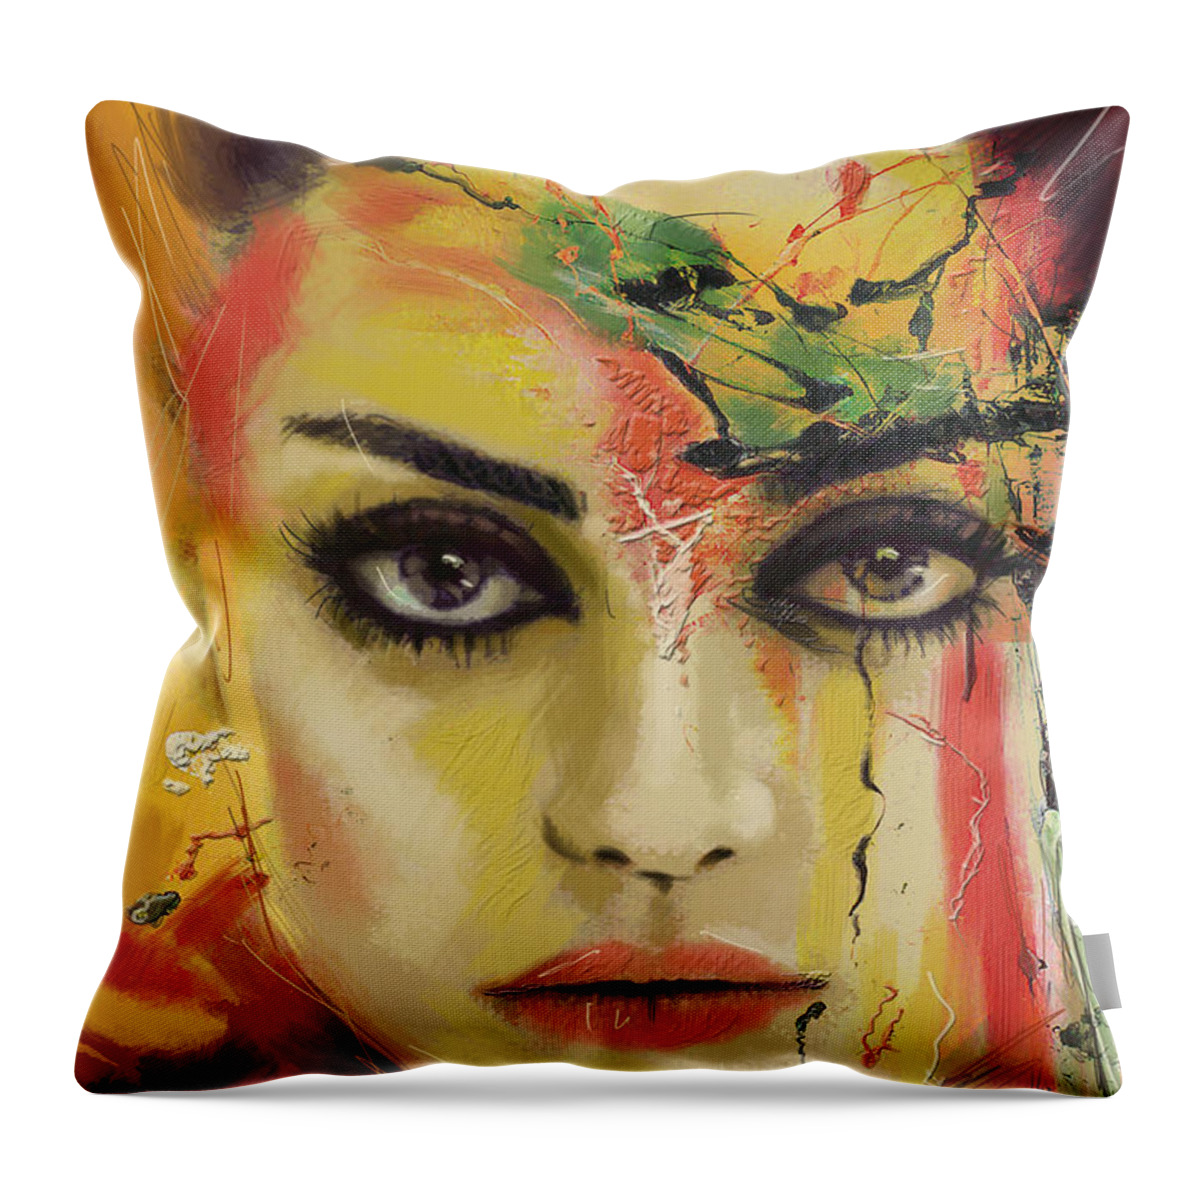 Mila Kunis Throw Pillow featuring the painting Mila Kunis #1 by Corporate Art Task Force